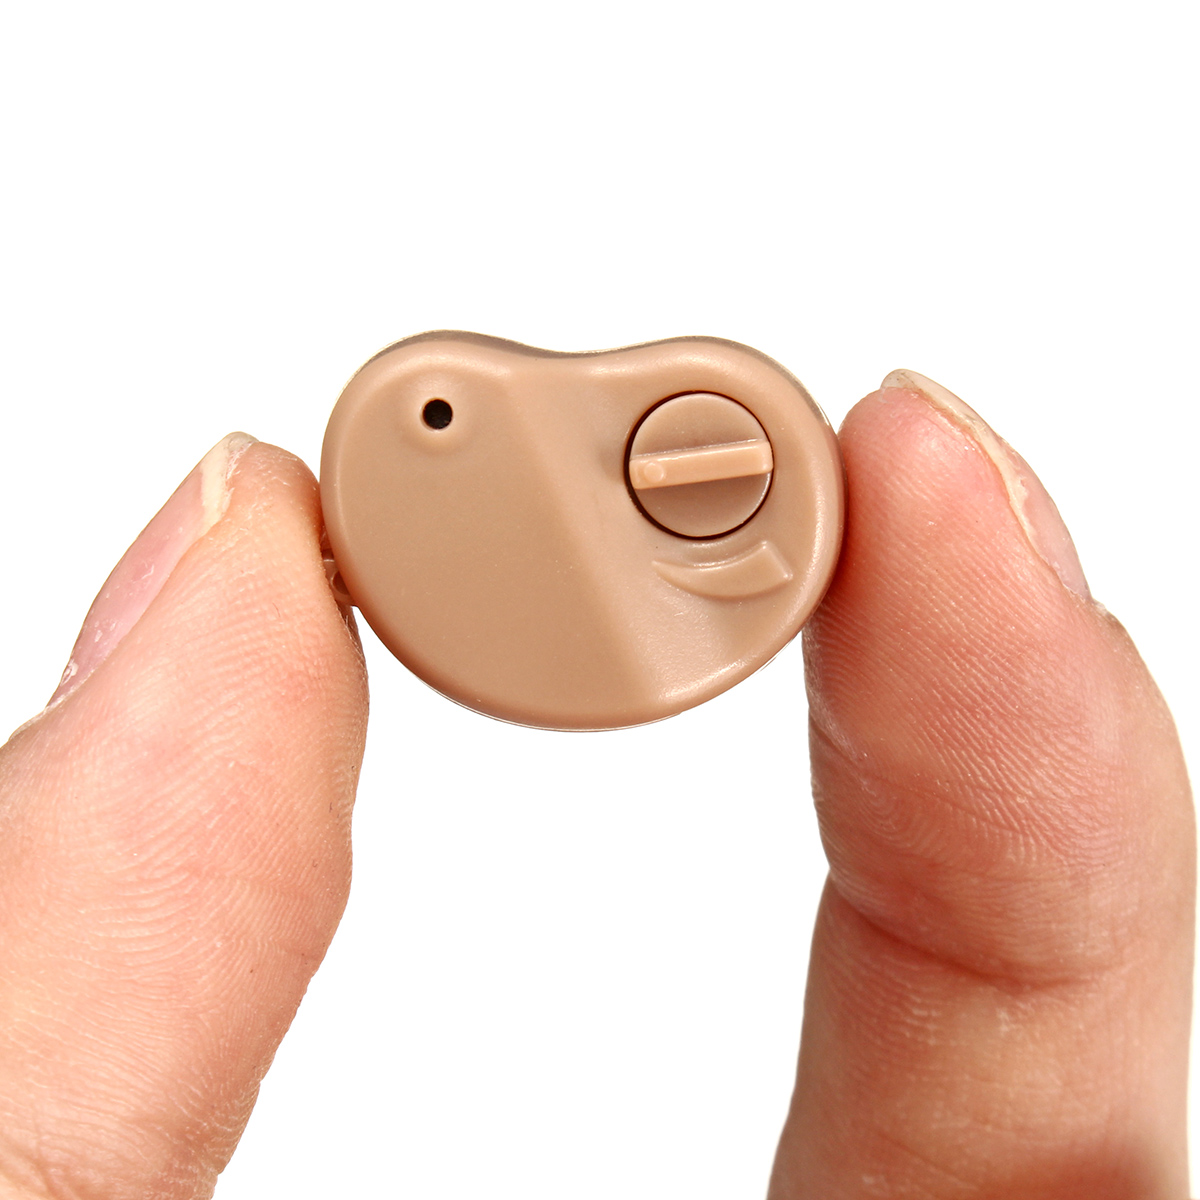 Adjustable Digital Hearing Aids Mini In-Ear Best Sound Voice Amplifier Invisible 18